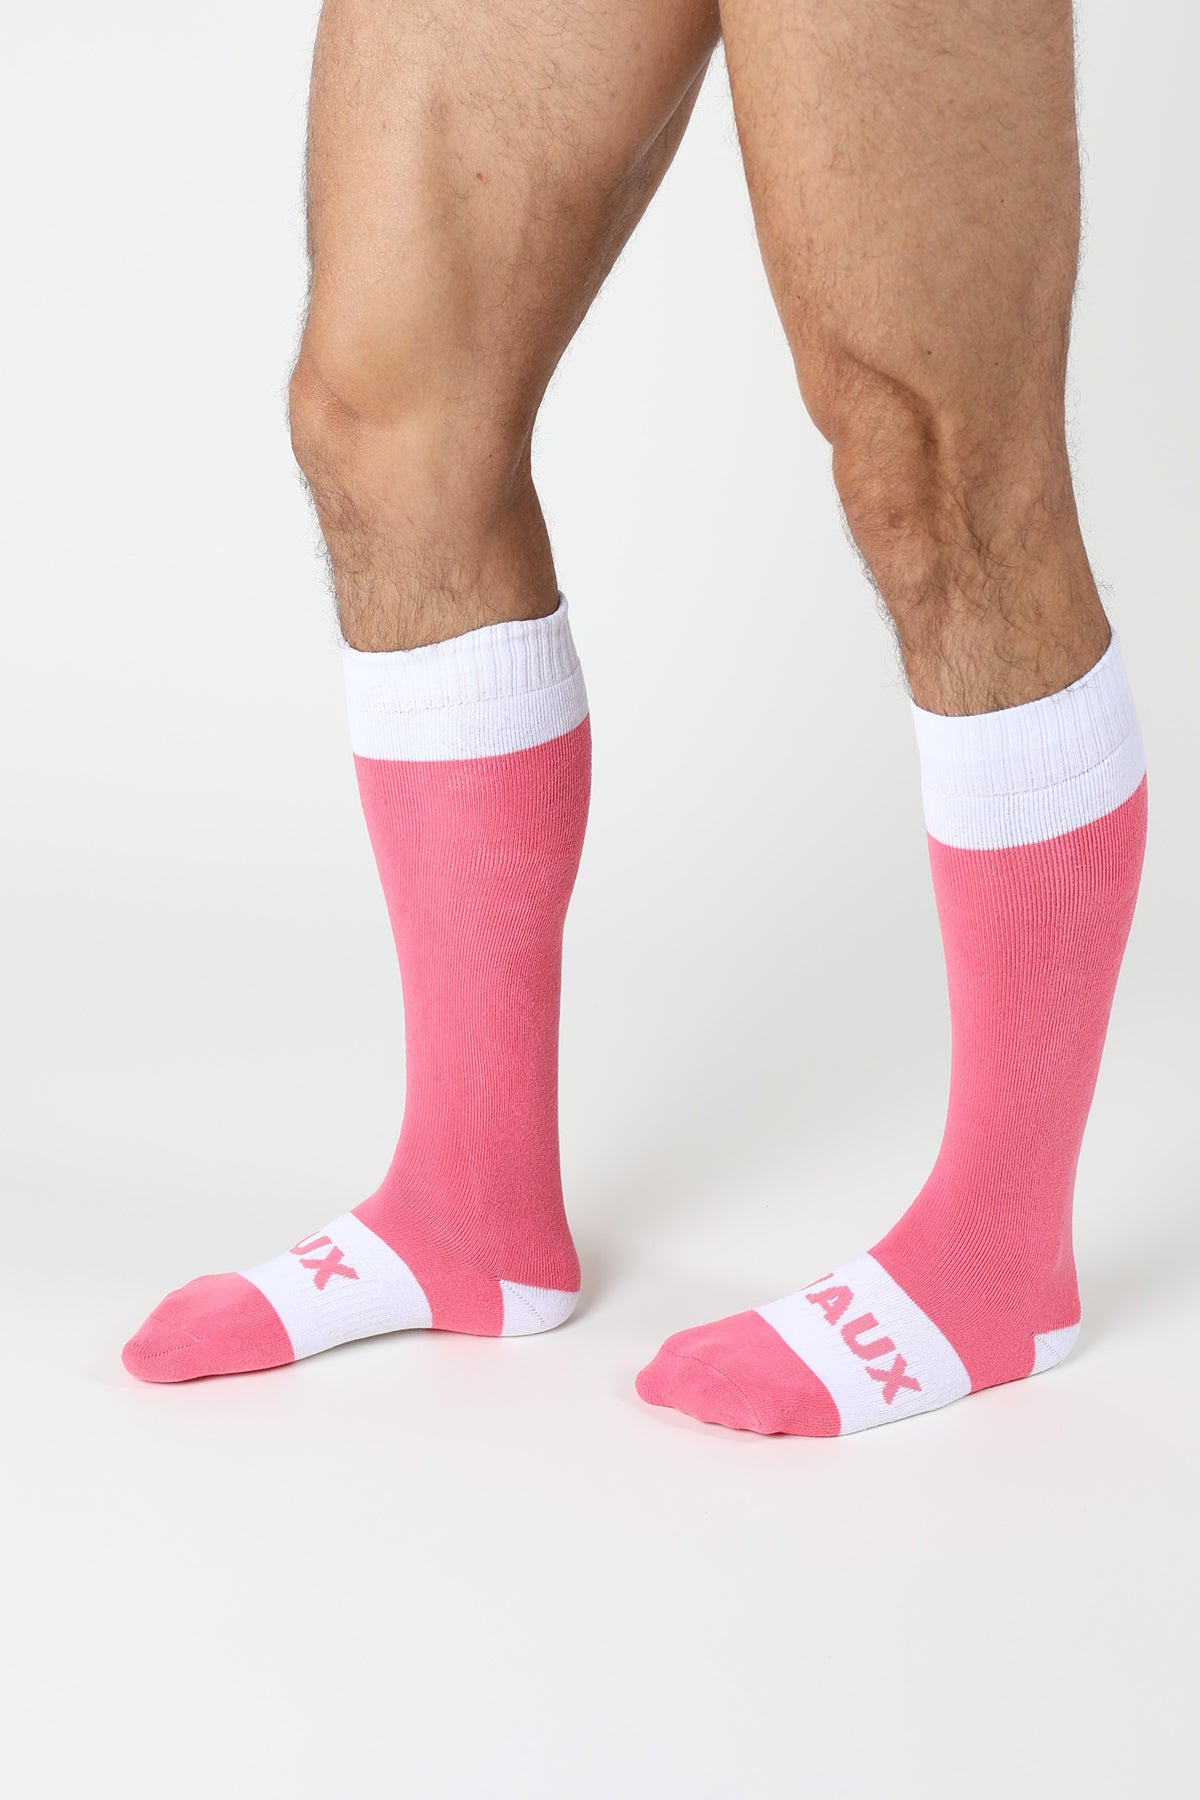 Vaux Cotton Candy Knee High Sock (ALL SALES FINAL) - TIMOTEO